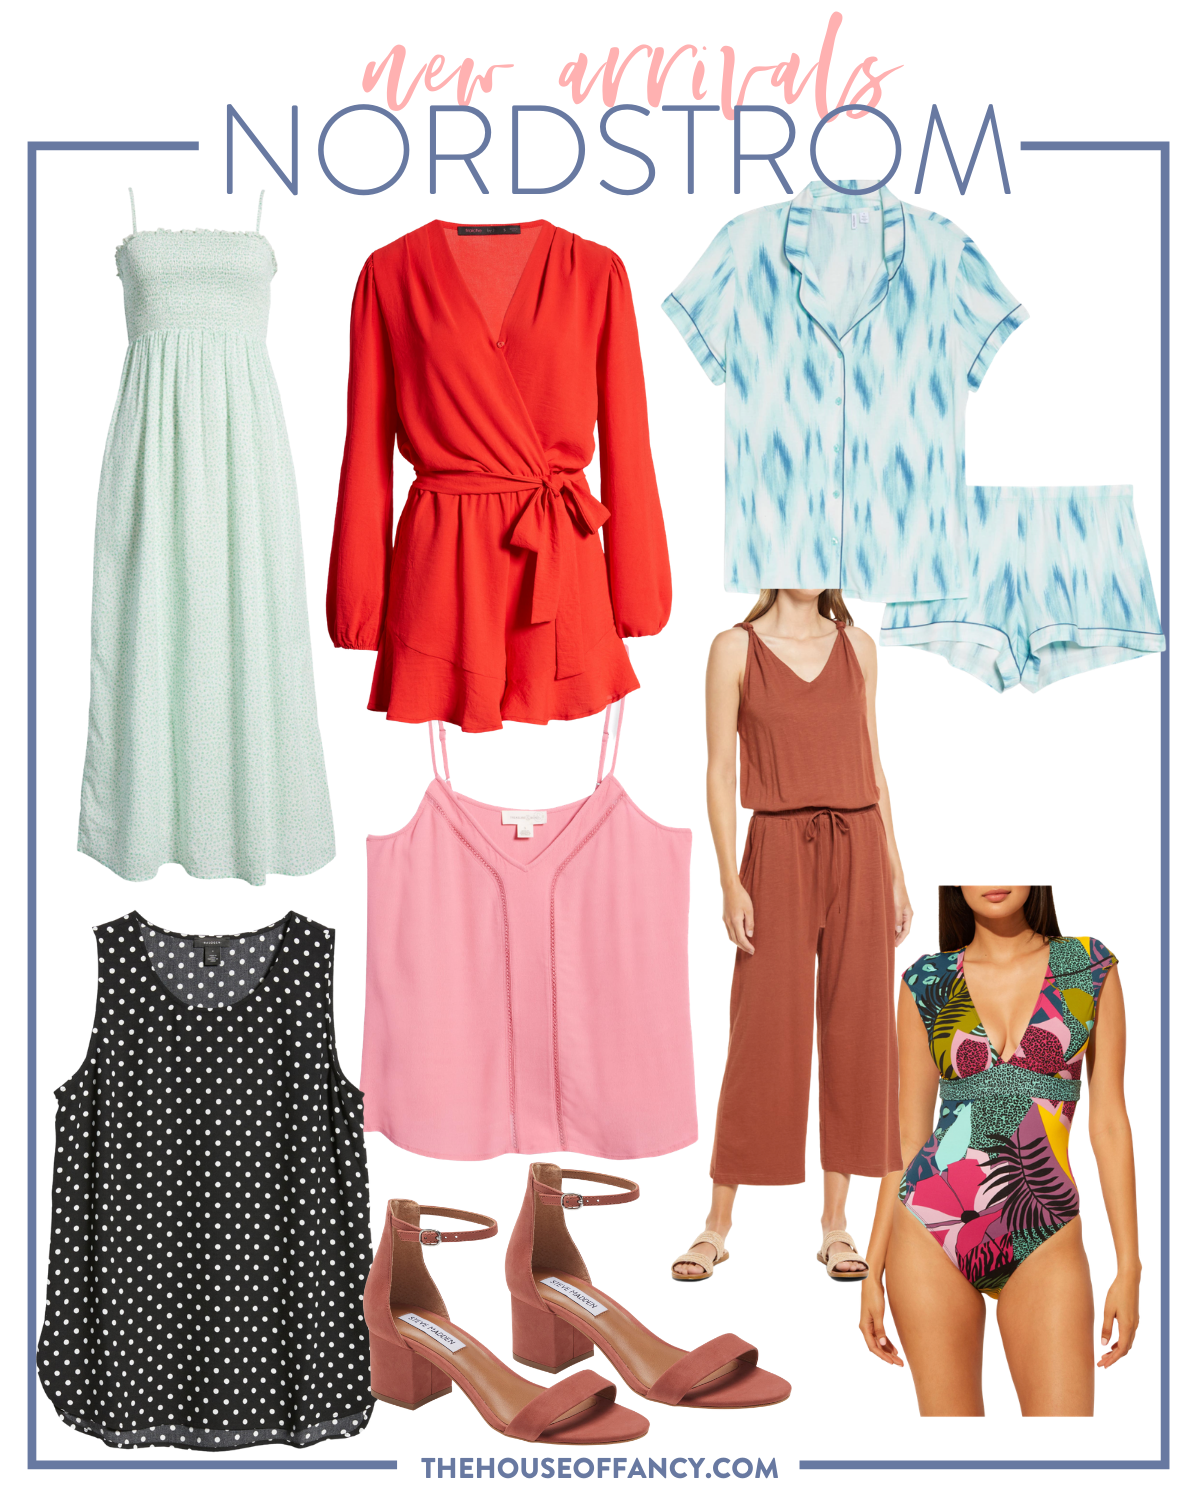 Nordstrom Anniversary Sale by popular Houston fashion blog, The House of Fancy: image of a black and white polka dot tank top, Steve Madden block heel ankle strap sandals, rust color jumper, pink tank top, tropical print one piece swimsuit, mint green smock top maxi dress, red long sleeve romper, and blue pajama set.